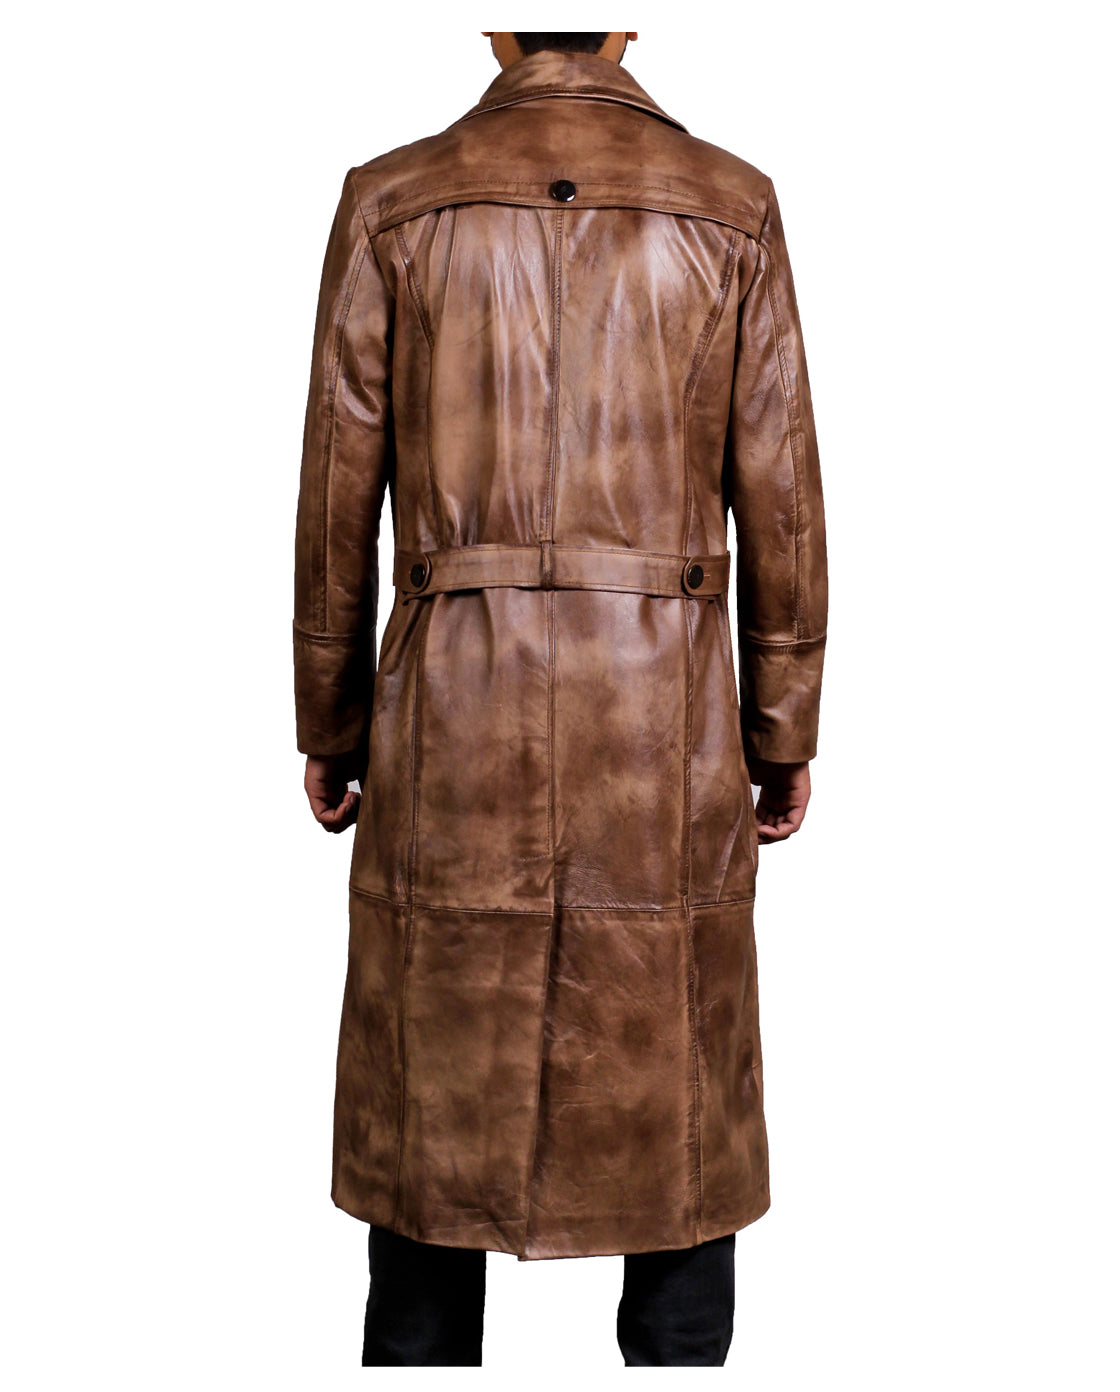 Brown Leather Trench Coat Mens - Ultimate Leather Jackets